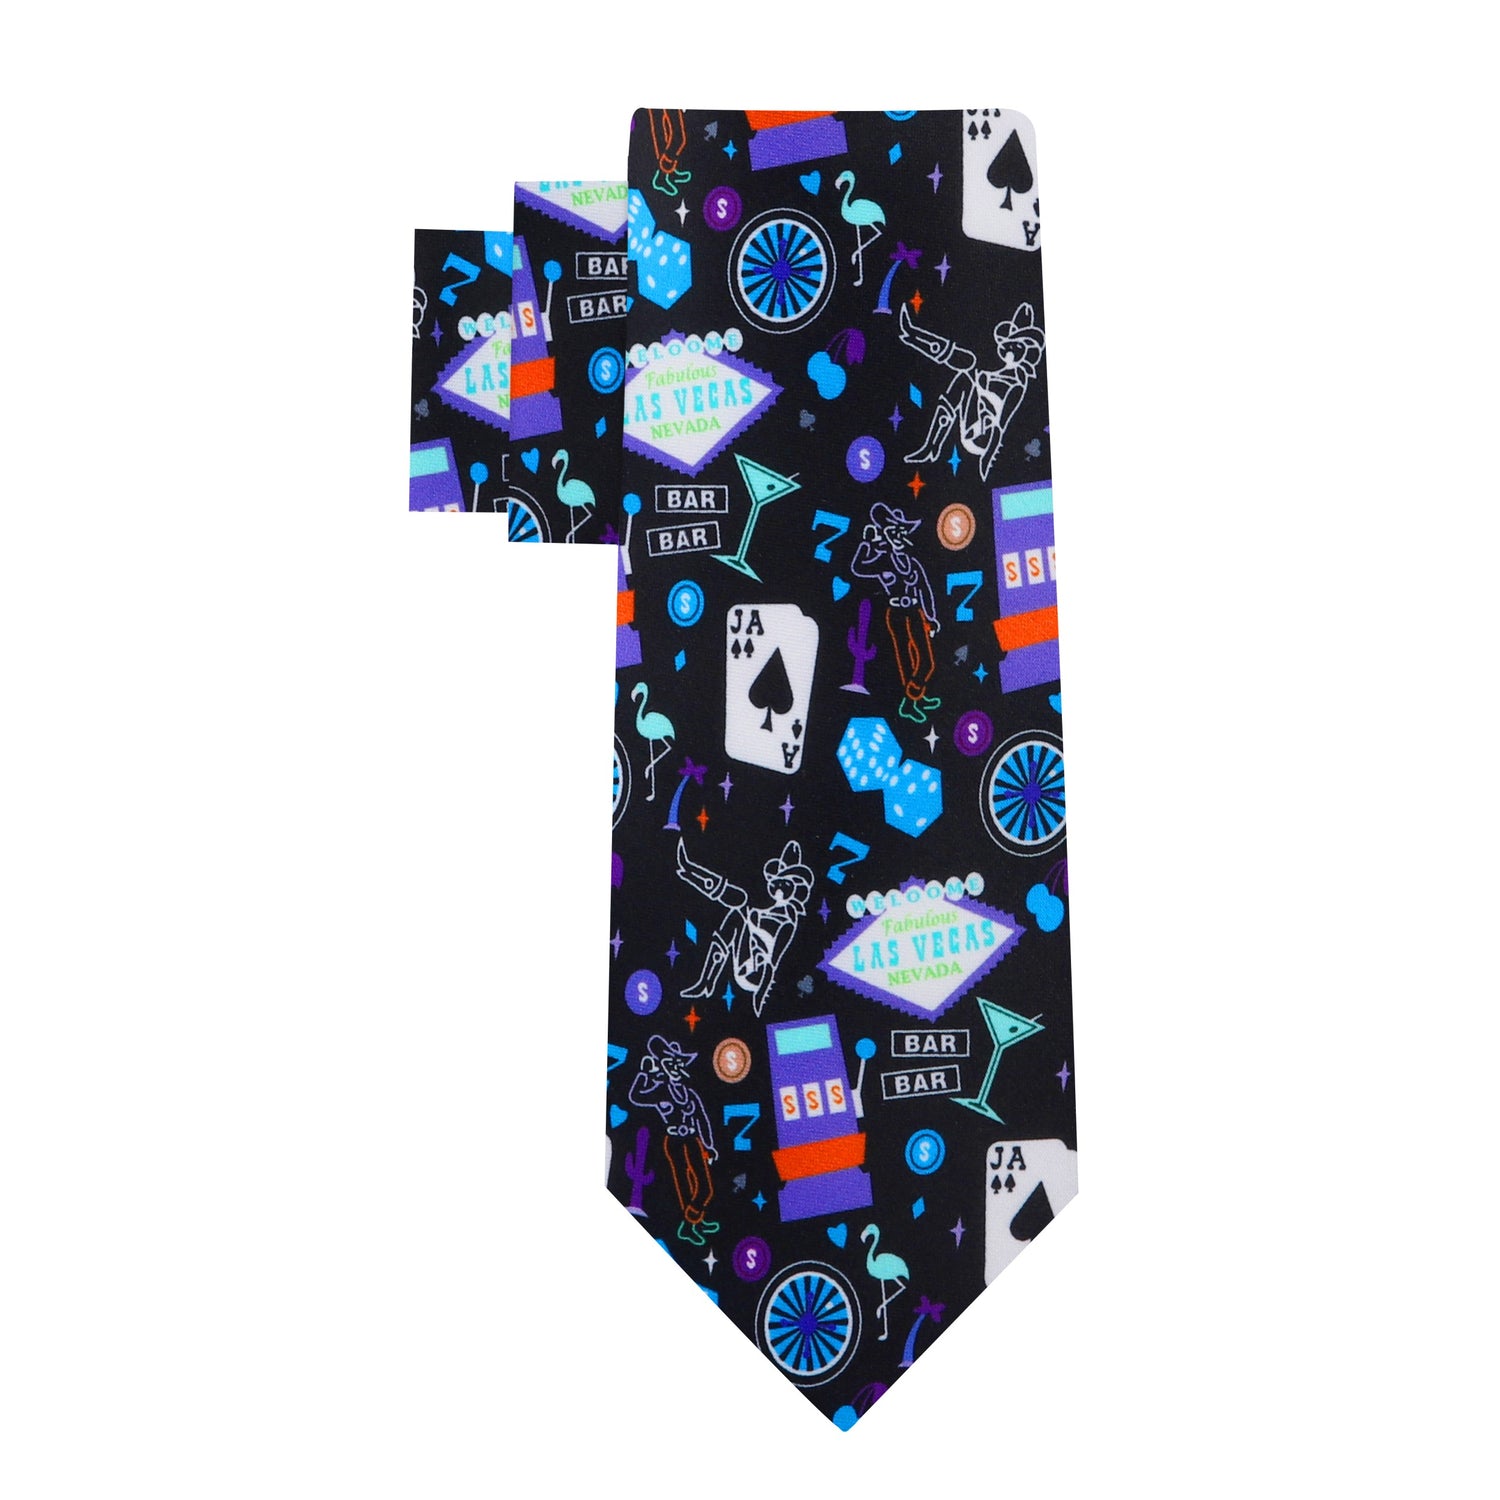 Alt View: Black with Vibrant Colored Vegas Themed Silk Necktie